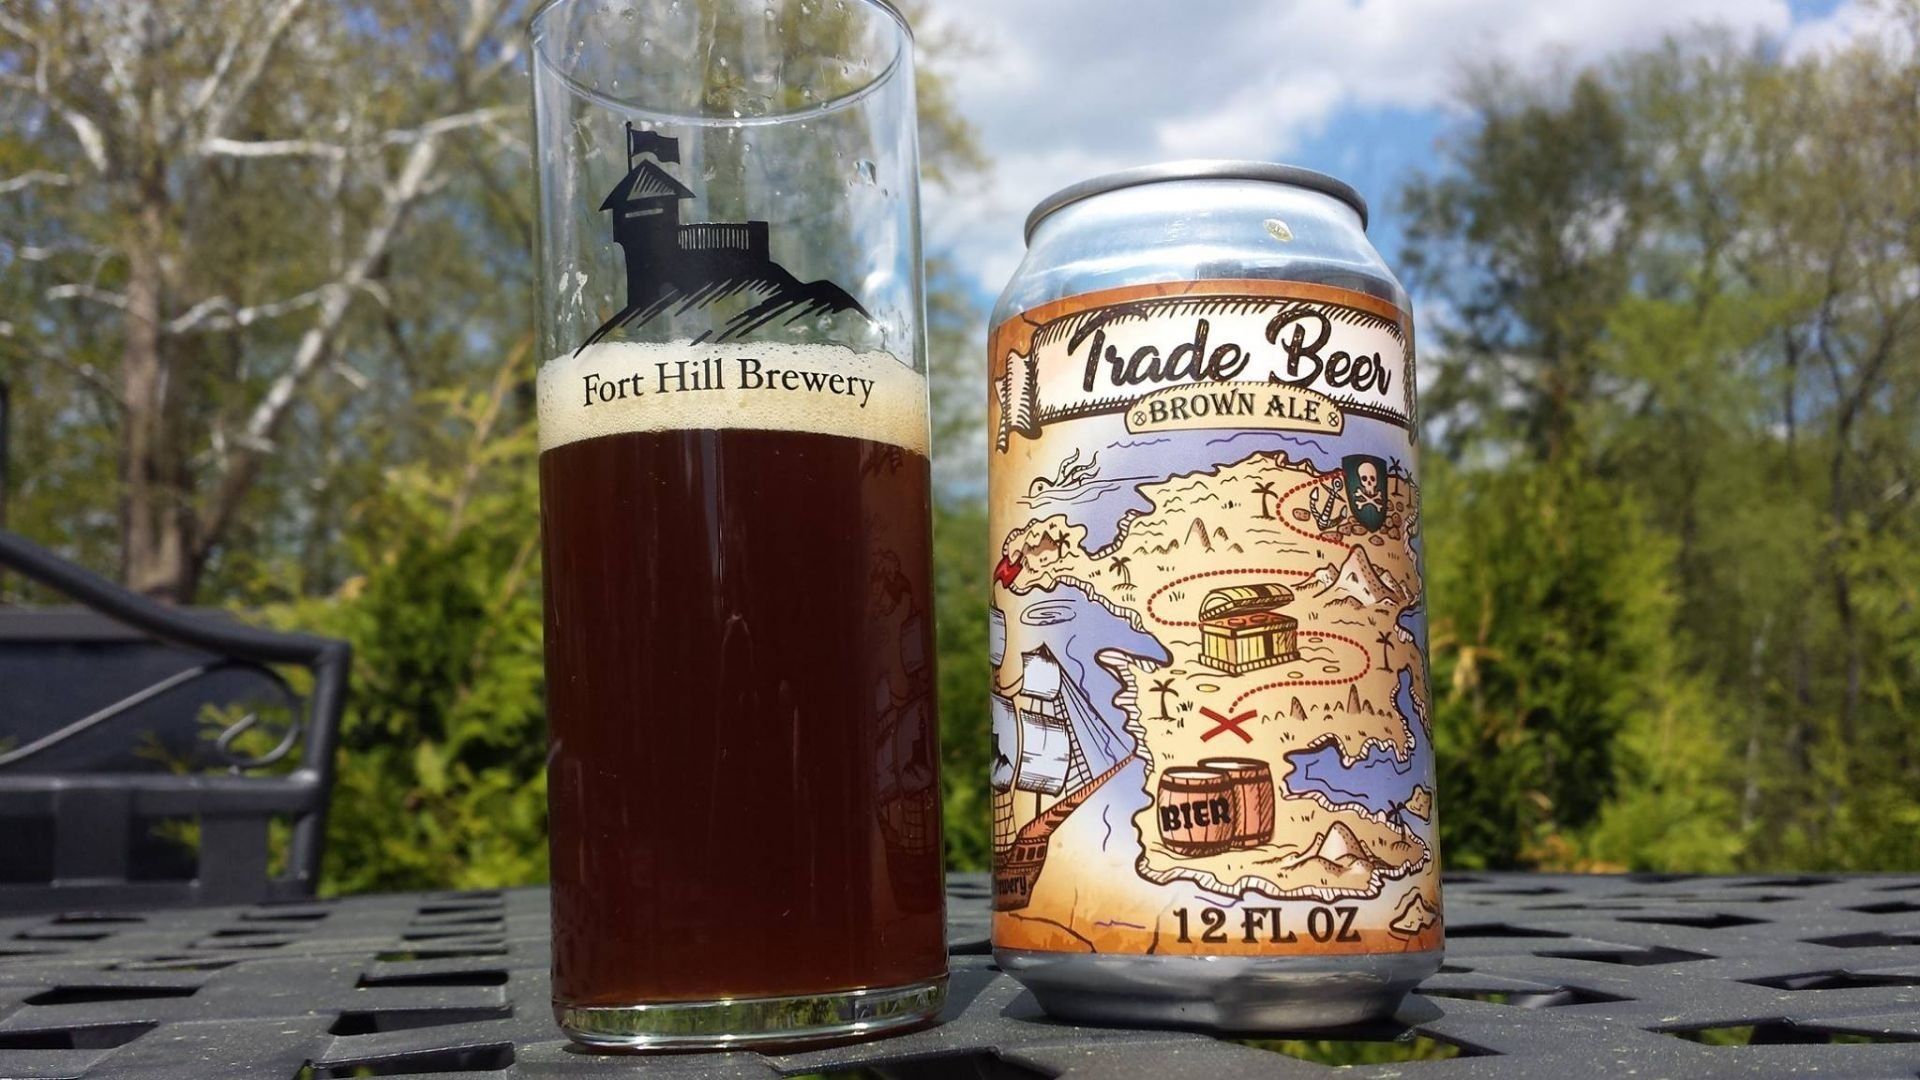 Fort Hill Brewery Trade Beer